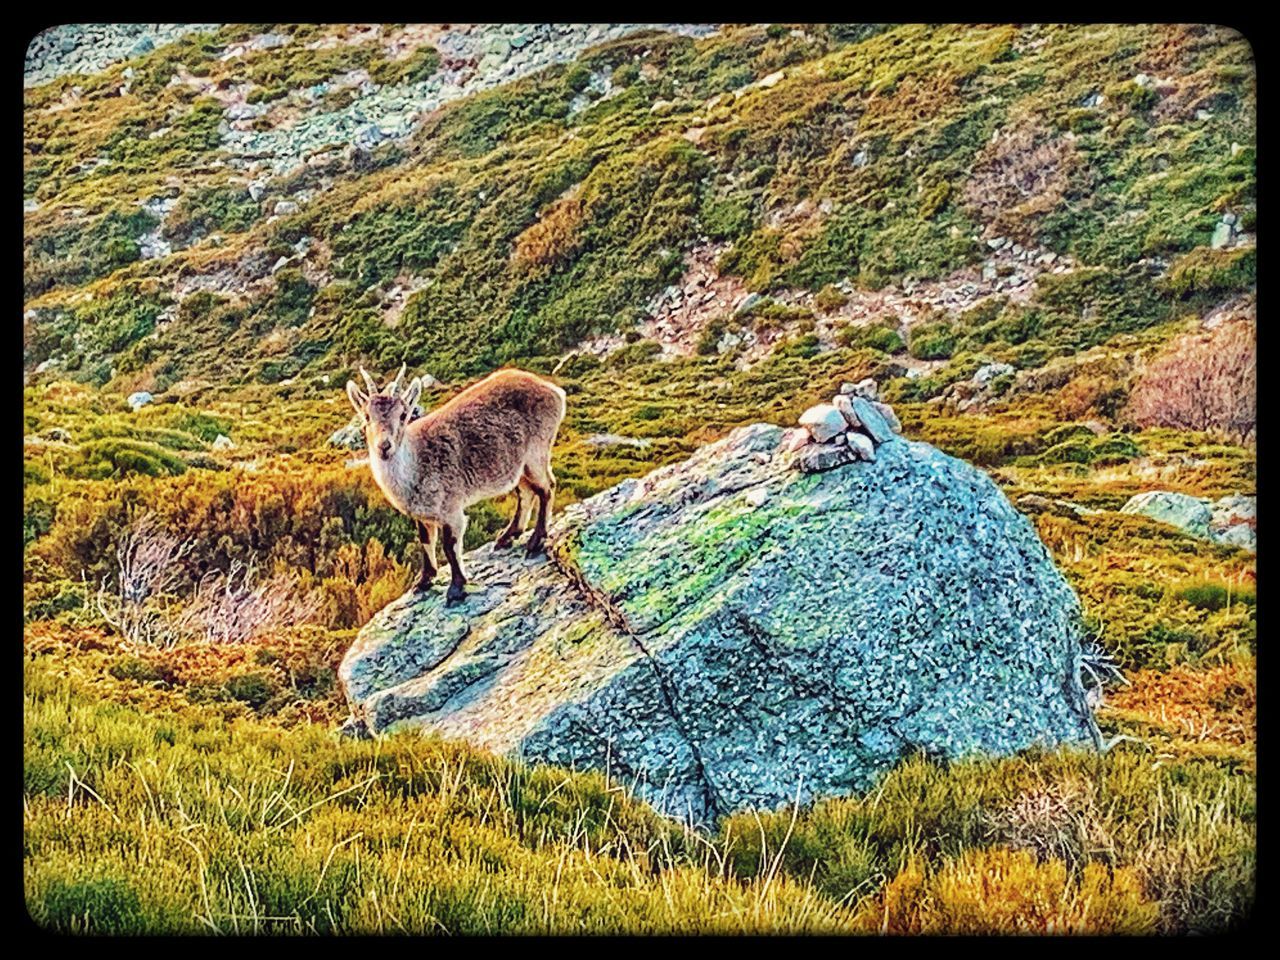 transfer print, auto post production filter, animal, animal themes, mammal, nature, one animal, no people, tundra, day, wildlife, animal wildlife, domestic animals, plant, autumn, painting, land, wilderness, grass, deer, field, pet, sheep, outdoors, livestock, beauty in nature, sunlight, rock, high angle view